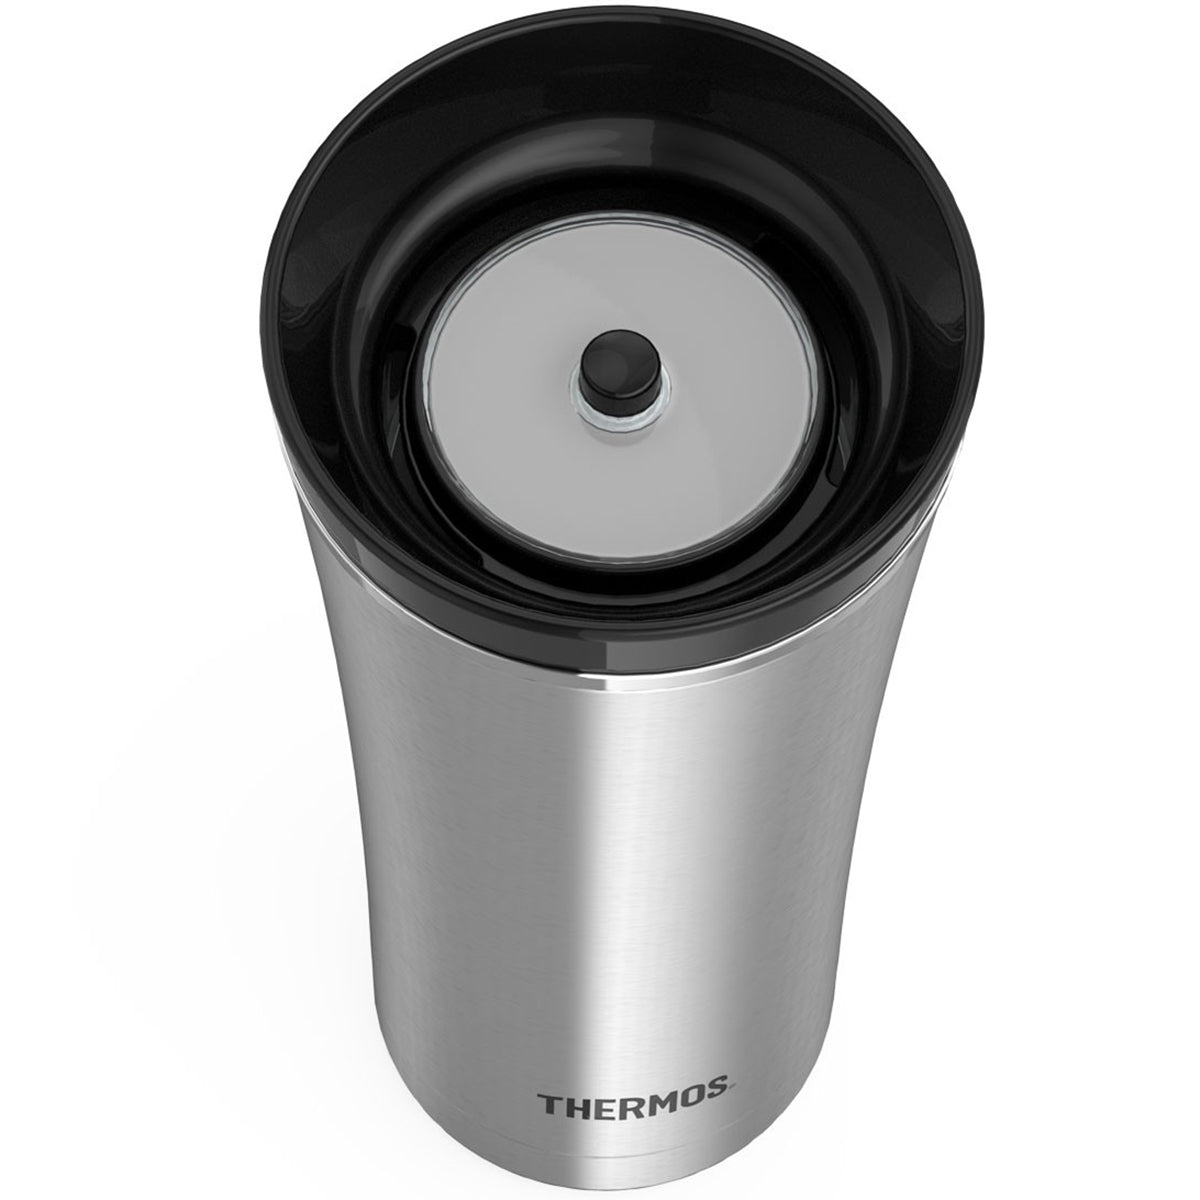 Thermos 16 oz. Sipp Vacuum Insulated Stainless Steel Travel Tumbler Thermos